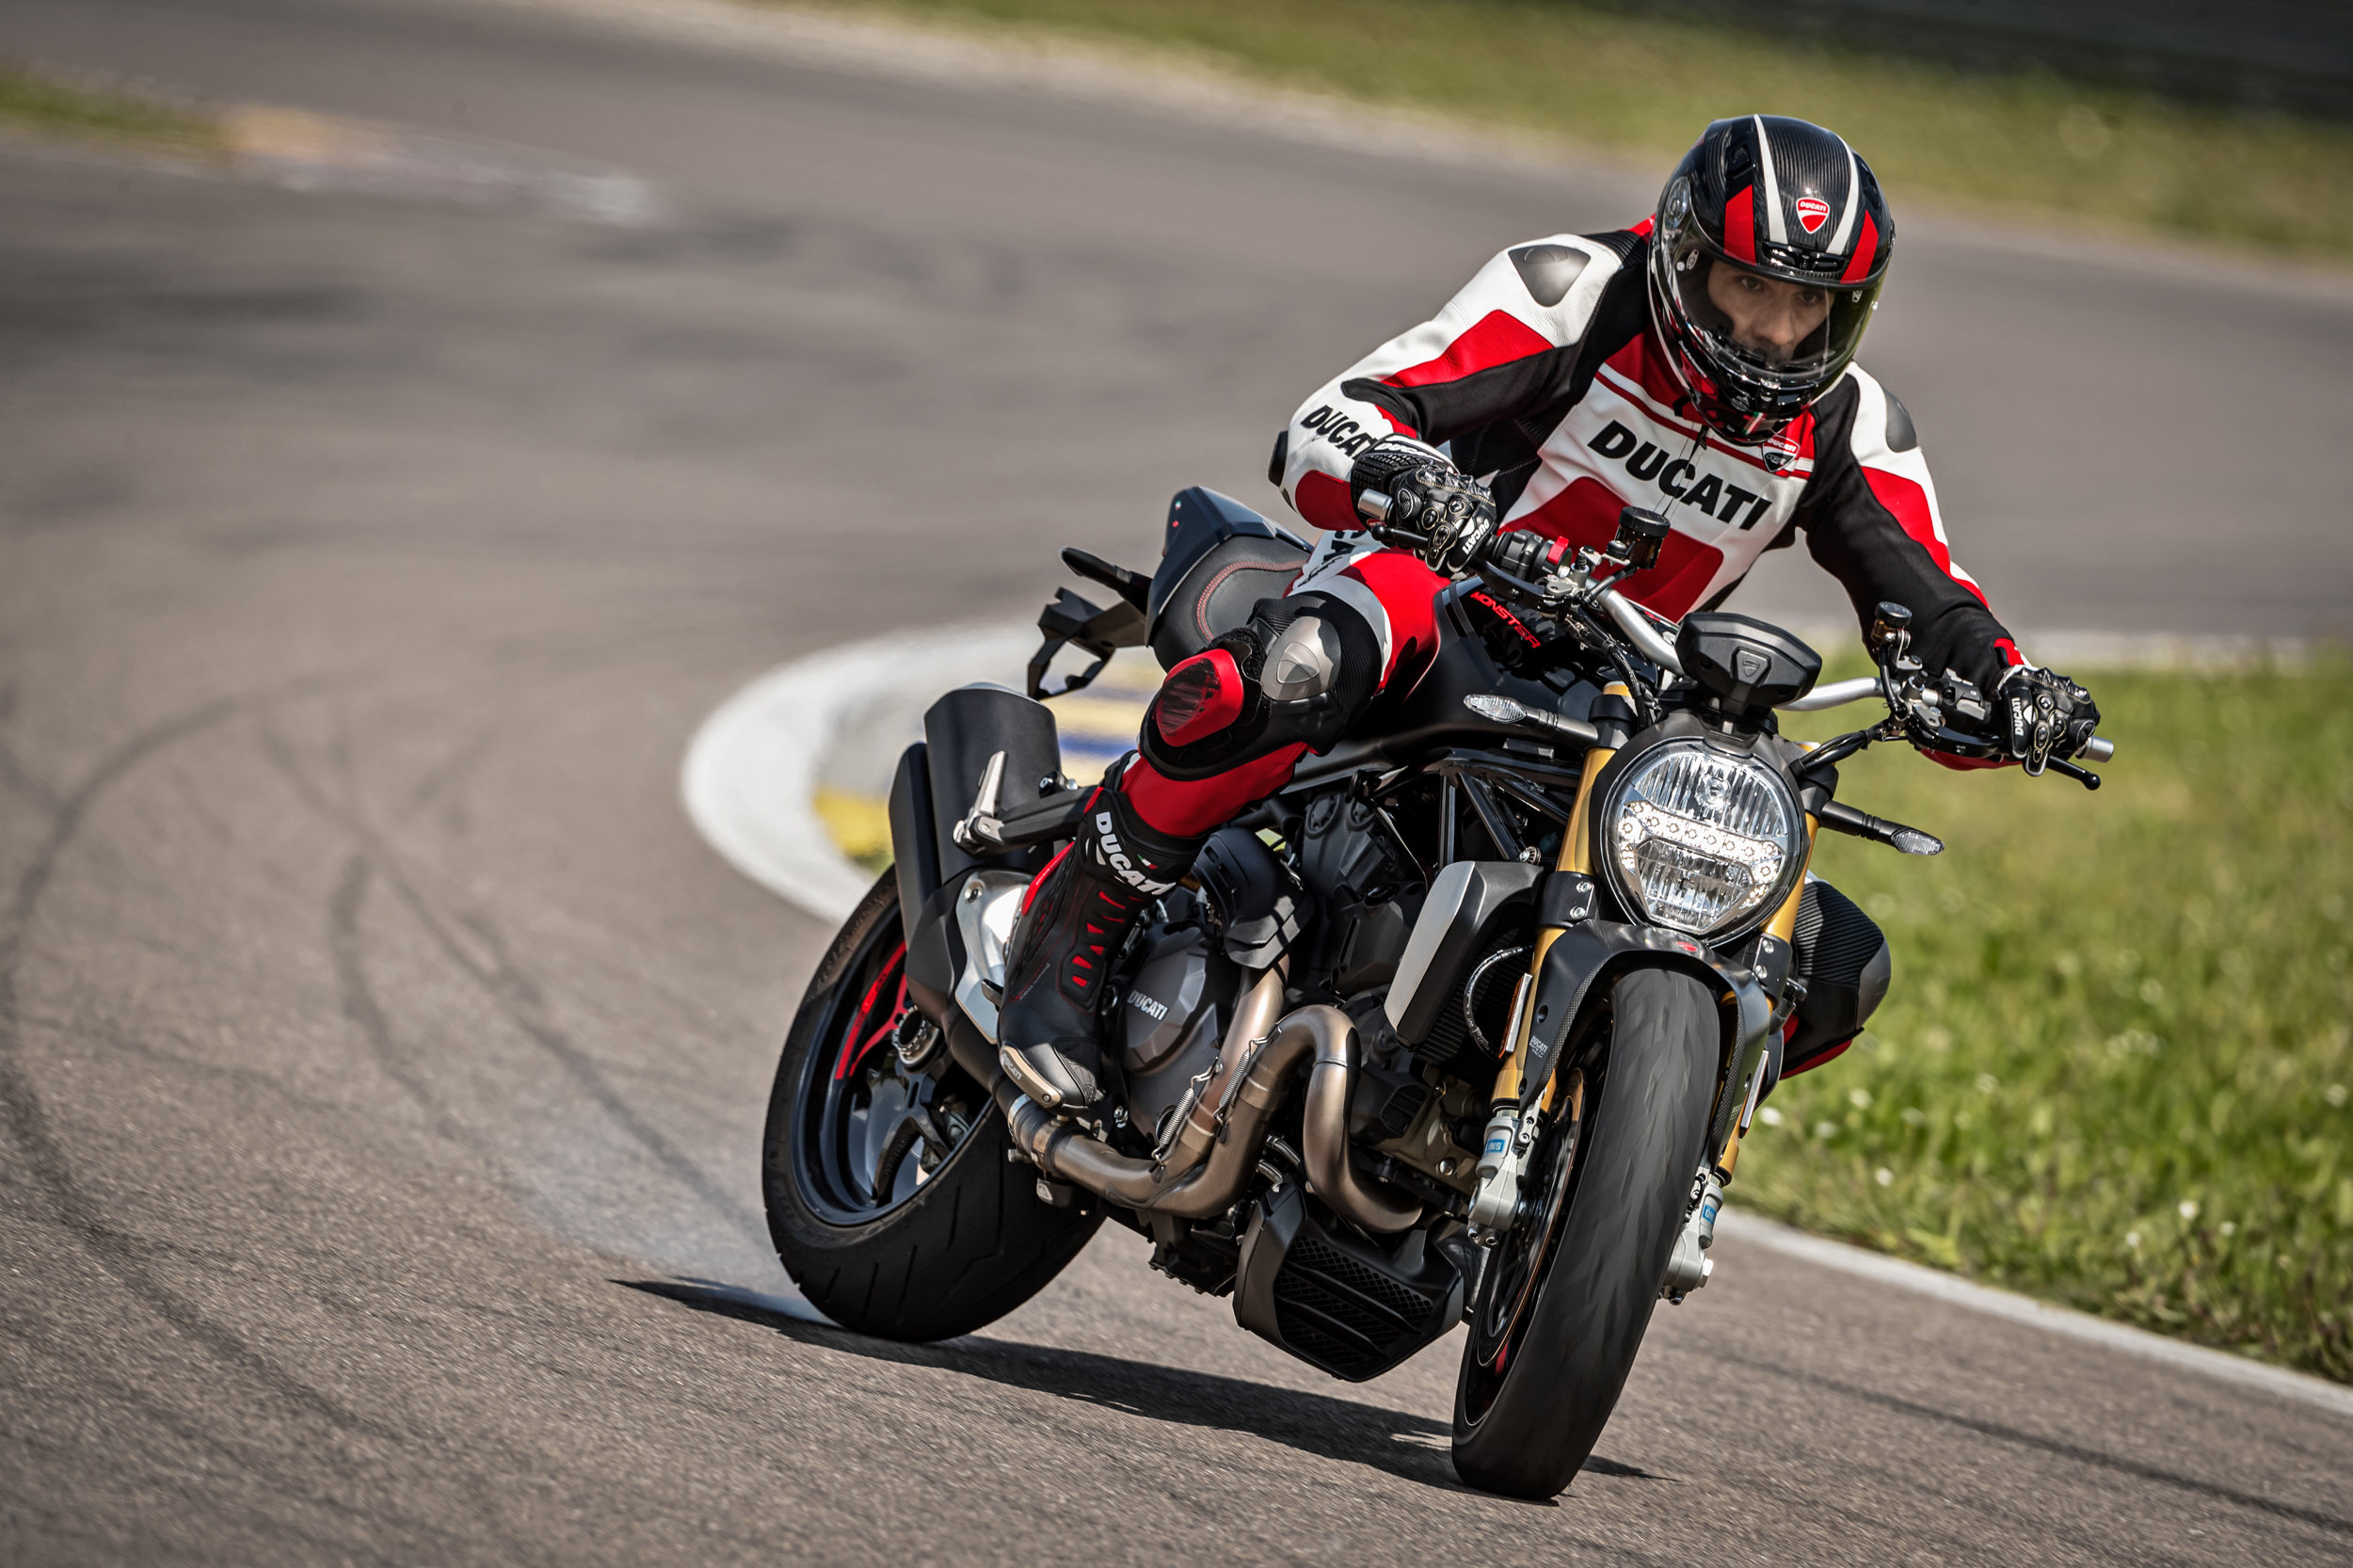 2020 Ducati Monster 1200 S - The Motorcycle Shows